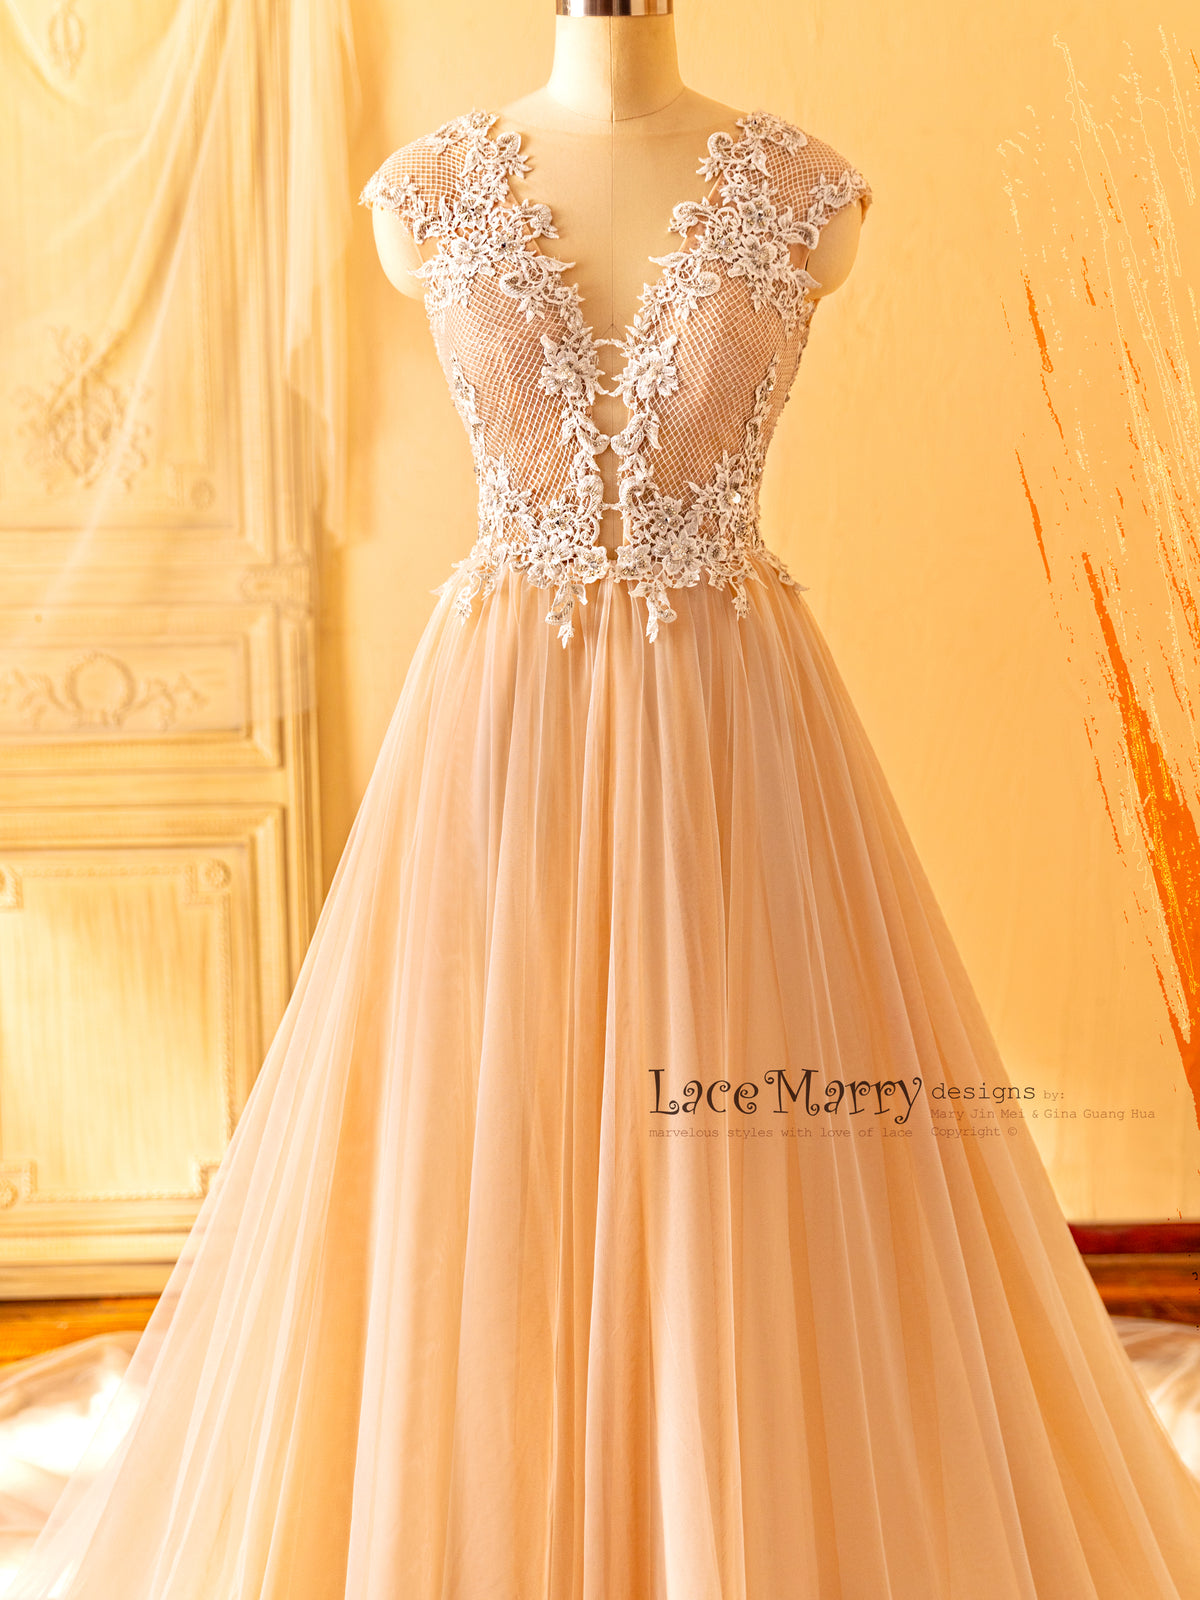 Gorgeous Contrast Lace Wedding Dress with Beading